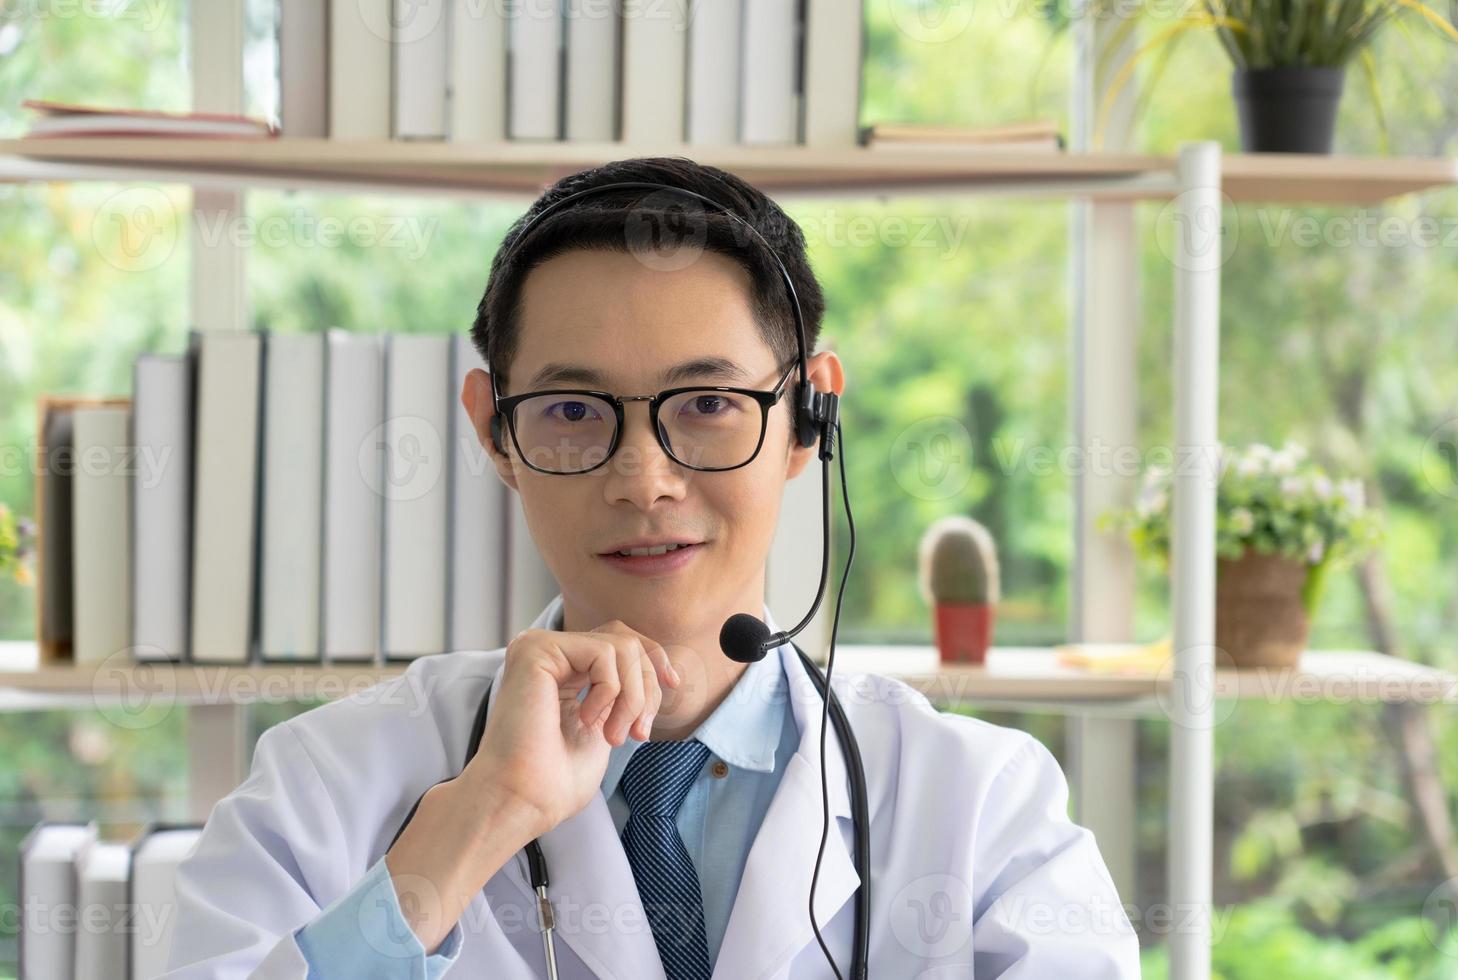 Doctor giving consult via video call photo